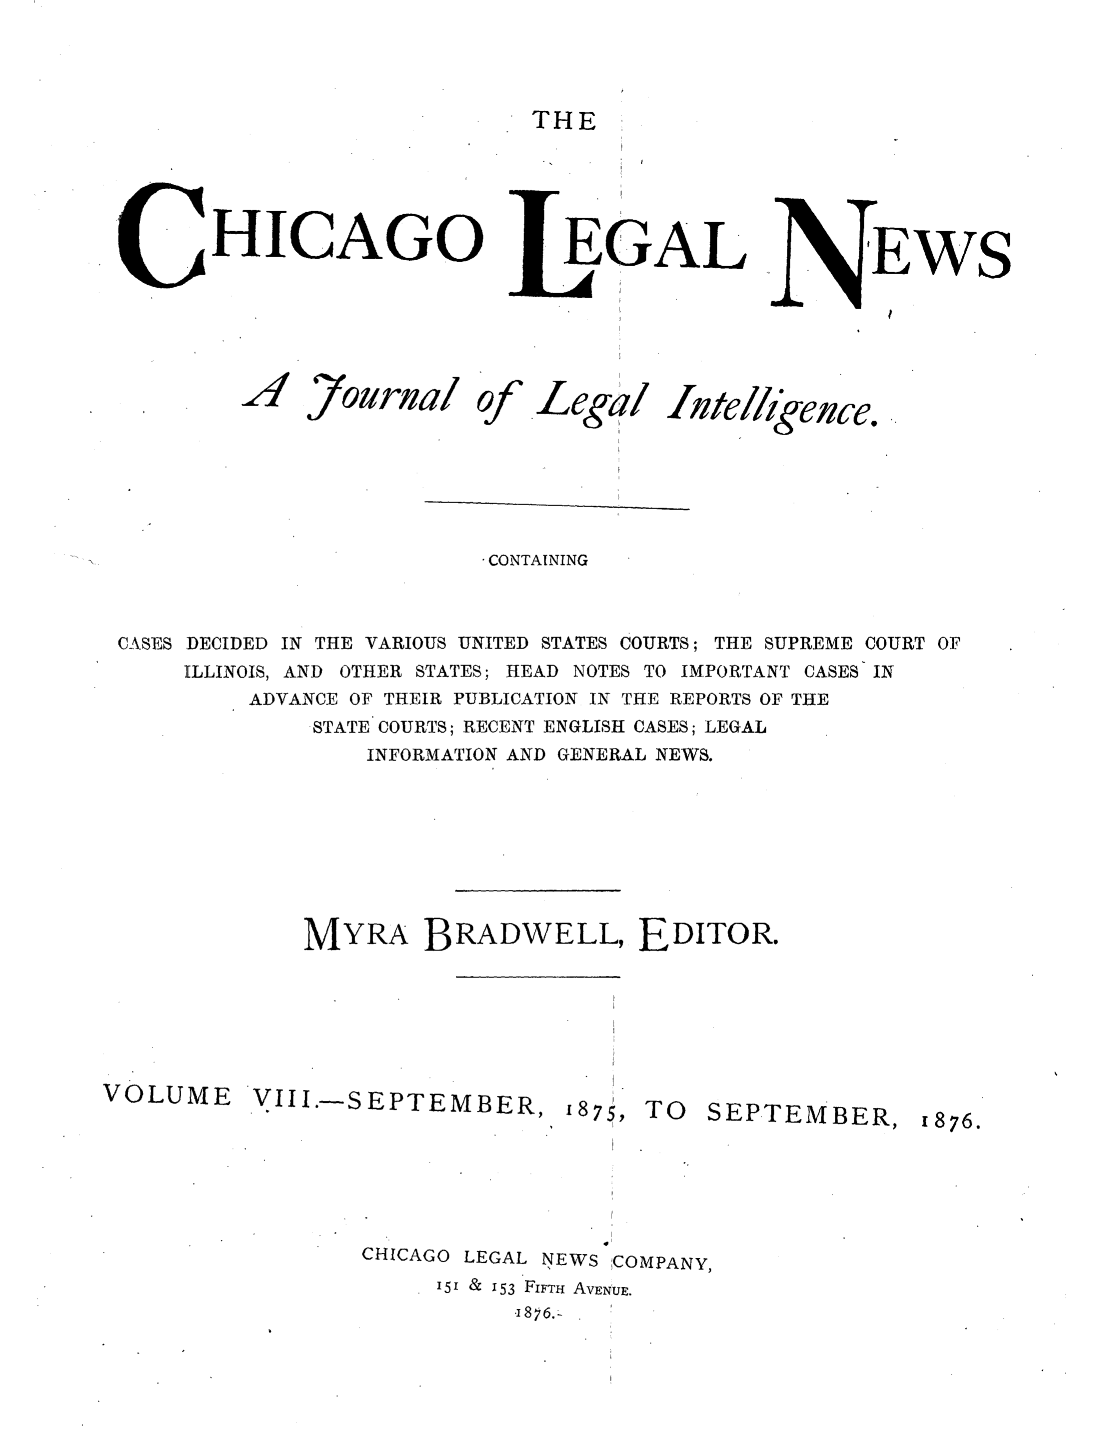 handle is hein.journals/chiclene8 and id is 1 raw text is: THE

HICAGO

AZ

7ournal

of

LEGAL
i
Lega/   nte

IEWS
I

/geuce.

CONTAINING
CASES DECIDED IN THE VARIOUS UNITED STATES COURTS; THE SUPREME COURT OF
ILLINOIS, AND OTHER STATES; HEAD NOTES TO IMPORTANT CASES IN
ADVANCE OF THEIR PUBLICATION IN THE REPORTS OF THE
STATE COURTS; RECENT ENGLISH CASES; LEGAL
INFORMATION AND GENERAL NEWS.
MYRA BRADWELL, EDITOR.
VOLUME VIII.-S EPTEMBER, 187,
V75, TO                              SEPTEMBER, 1876.
CHICAGO LEGAL NEWS COMPANY,
151 & 153 FIFTH AVE NUE.


